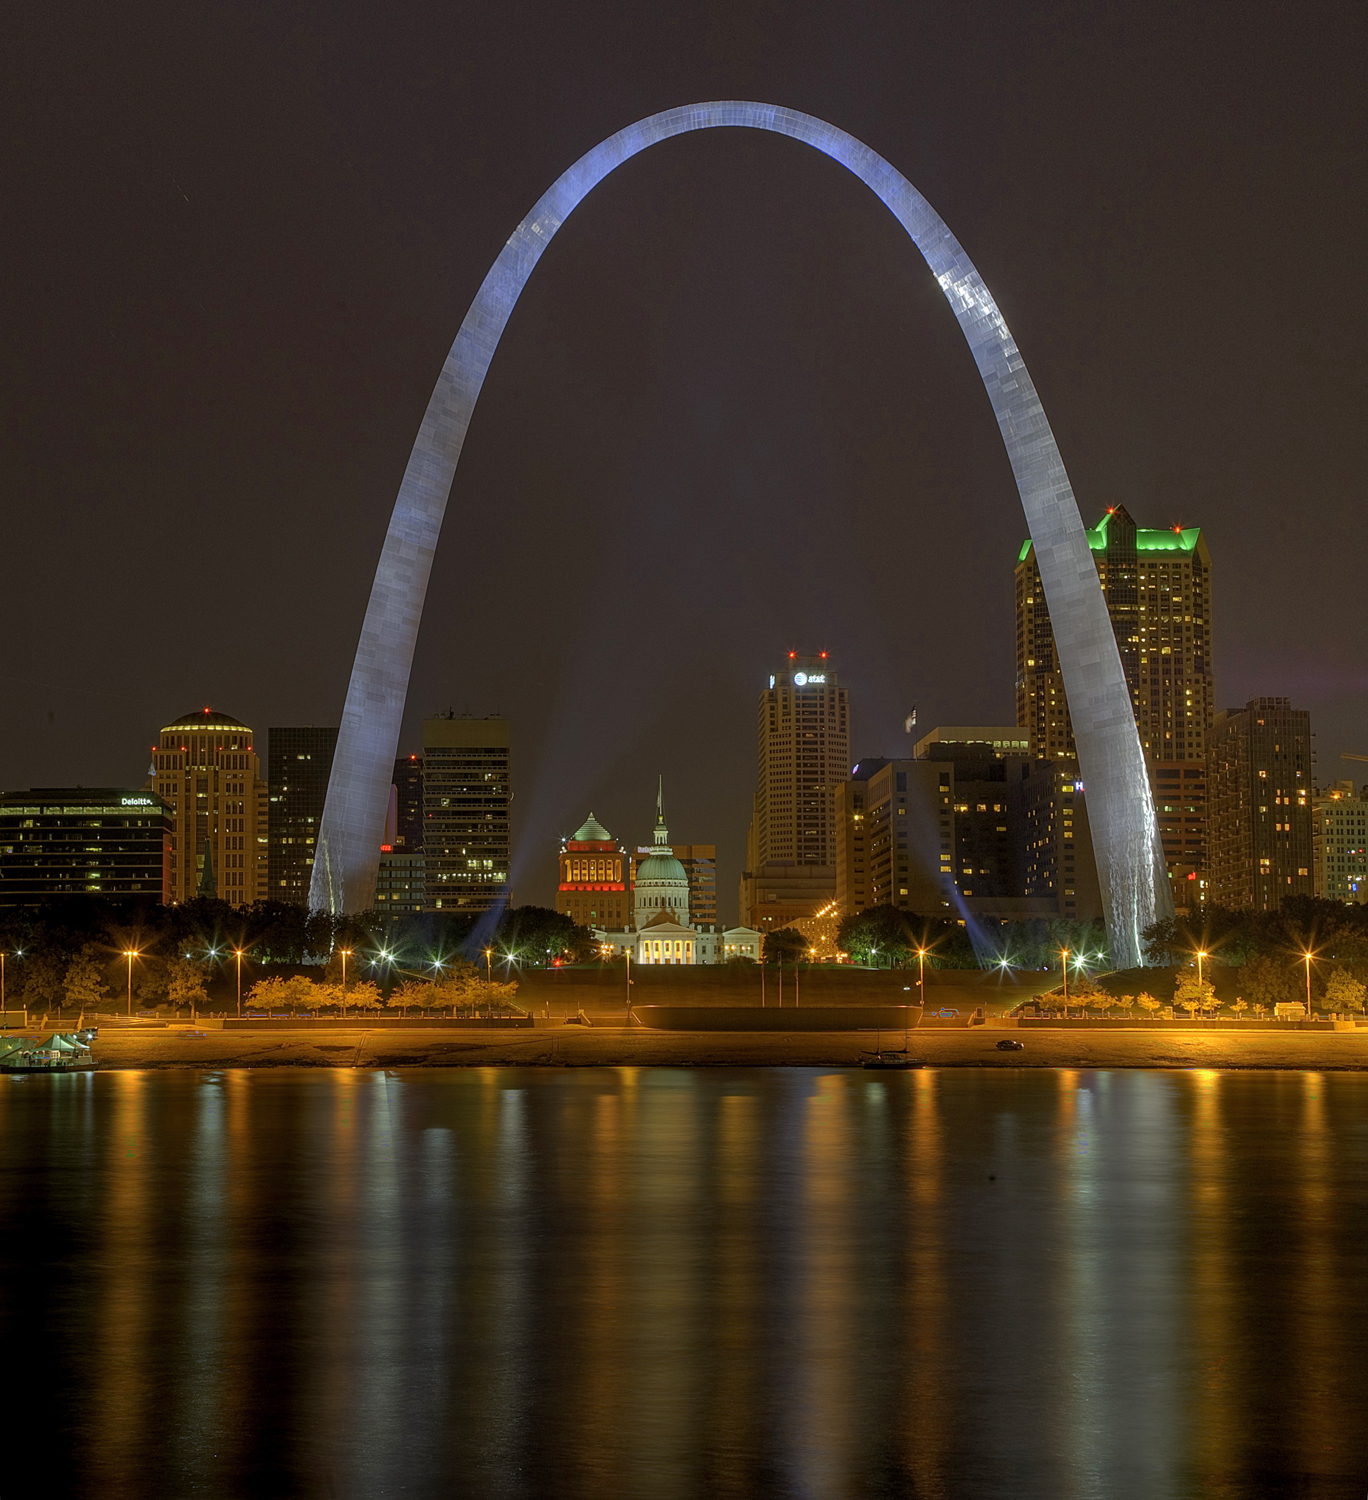 Meet me in St. Louis -- for a most sinful time! - nrd.kbic-nsn.gov